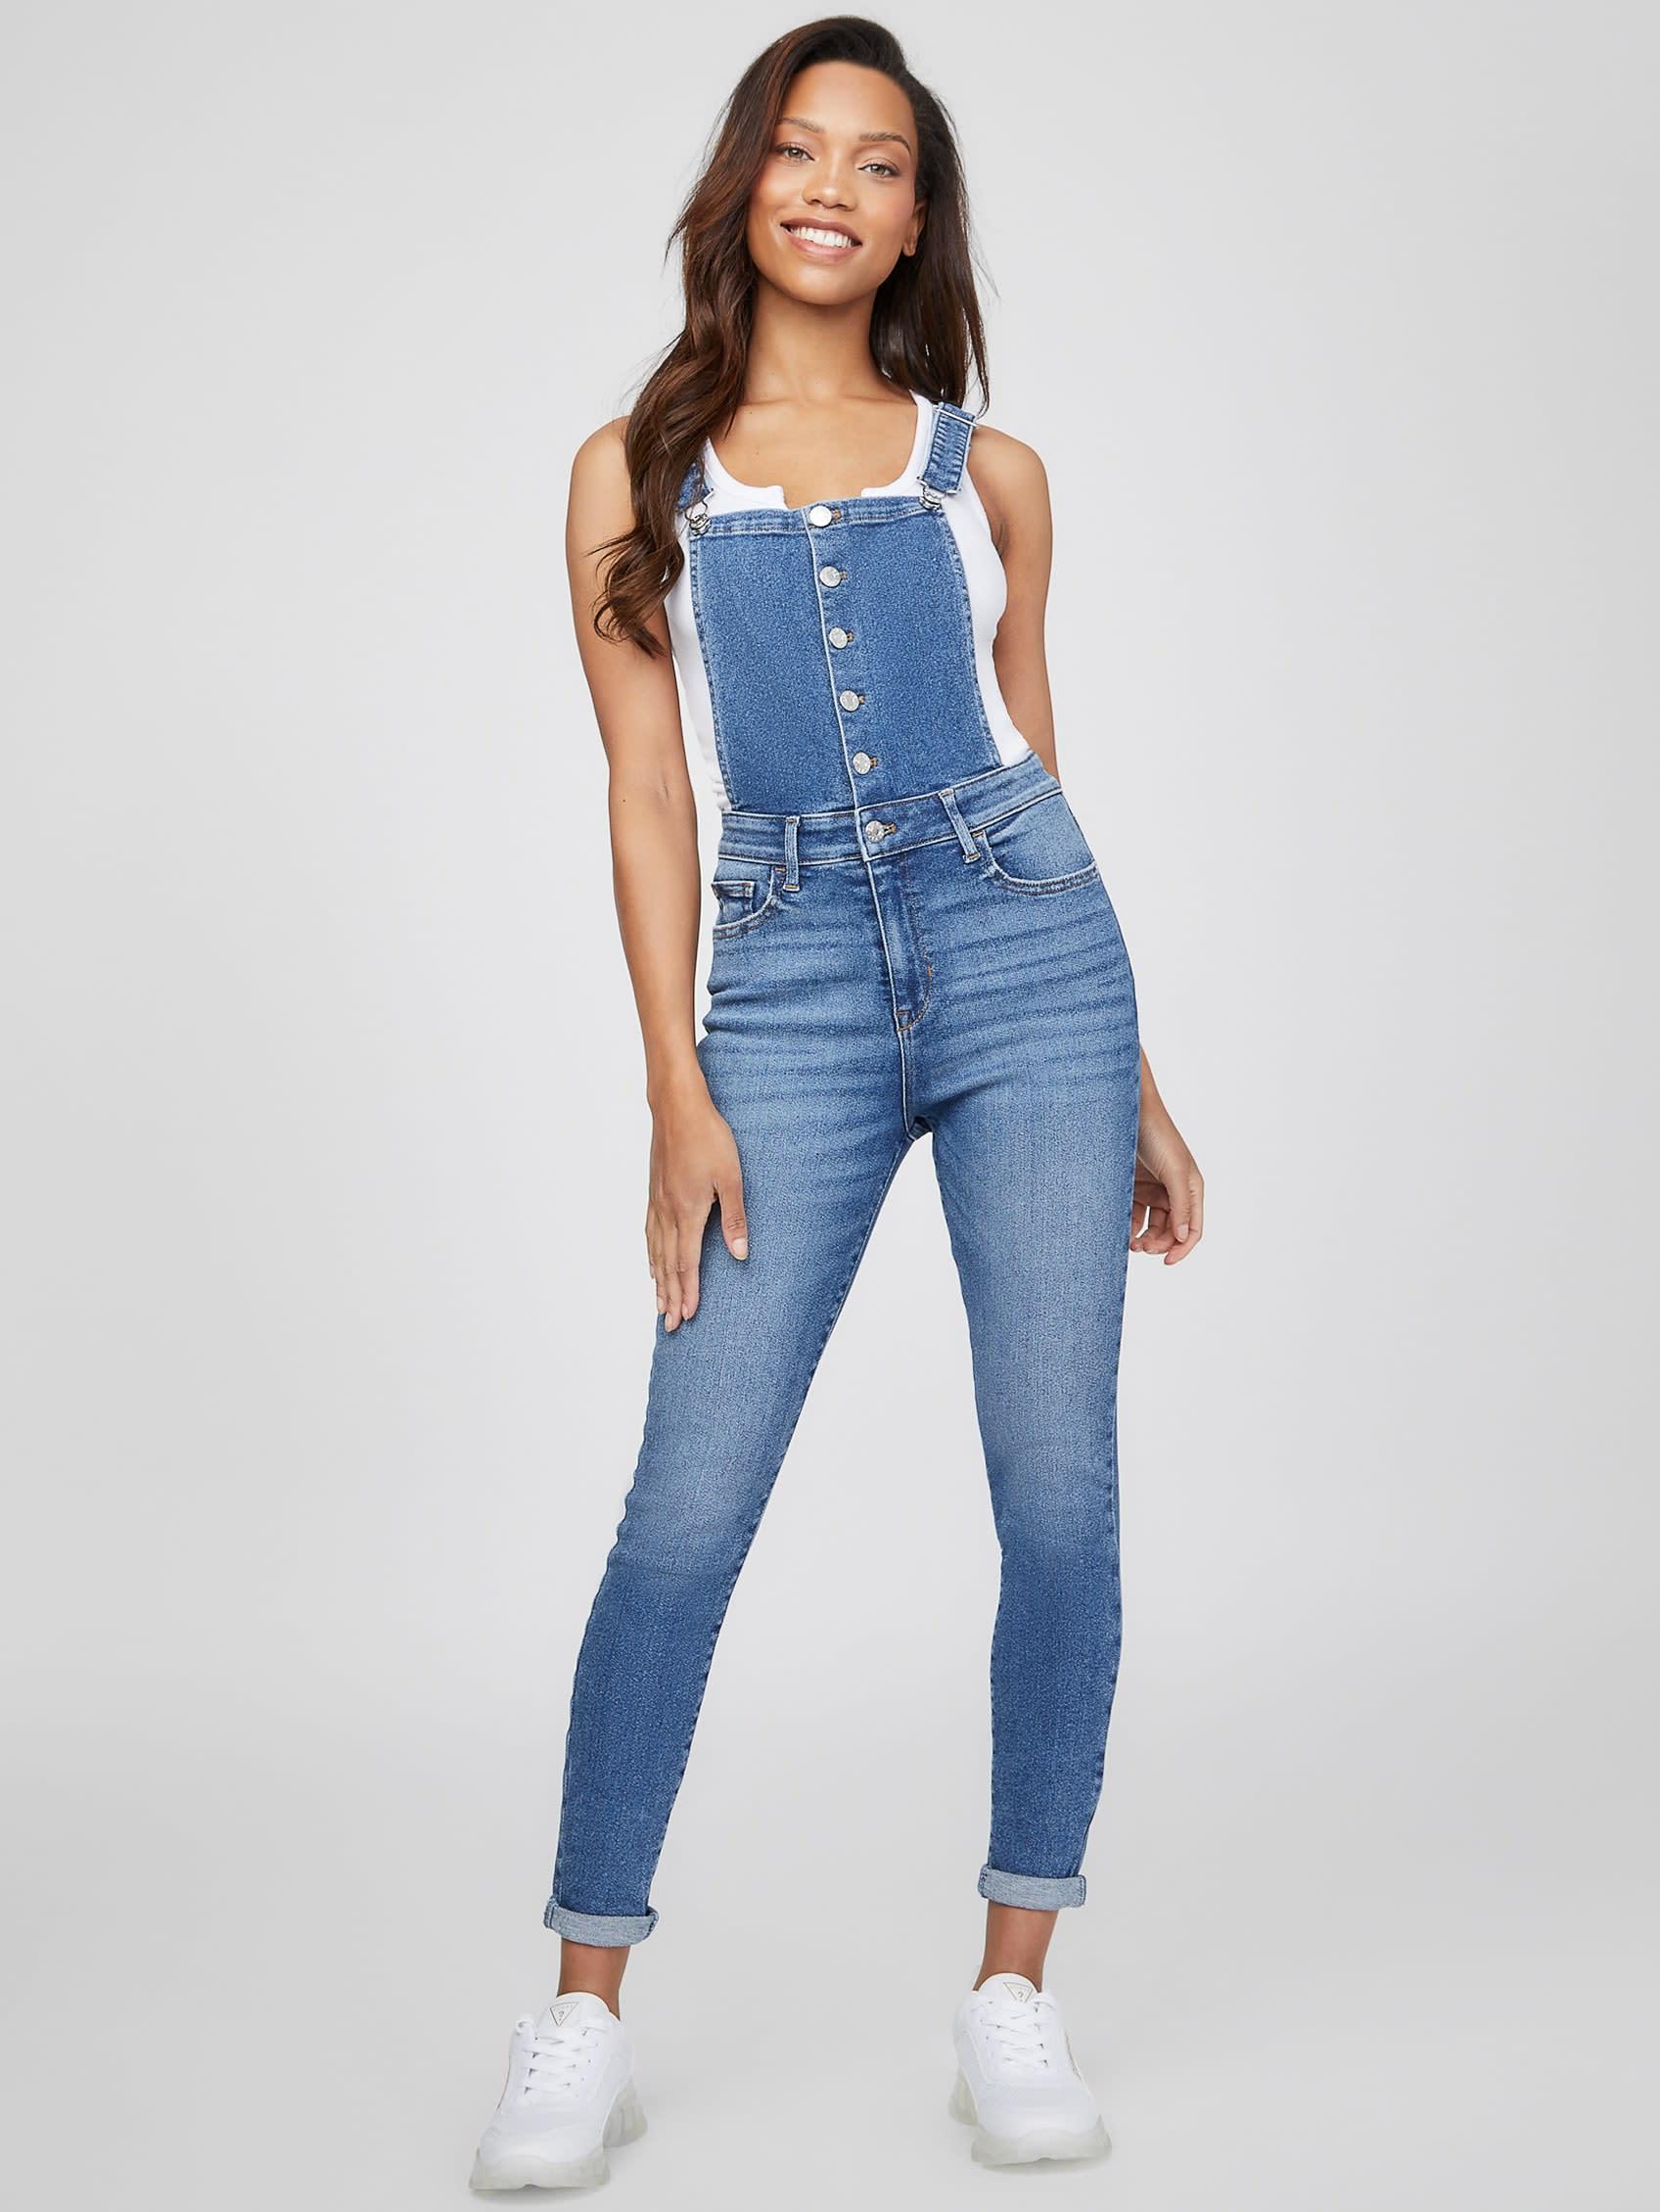 Guess Factory Julep Denim Overalls in Blue | Lyst